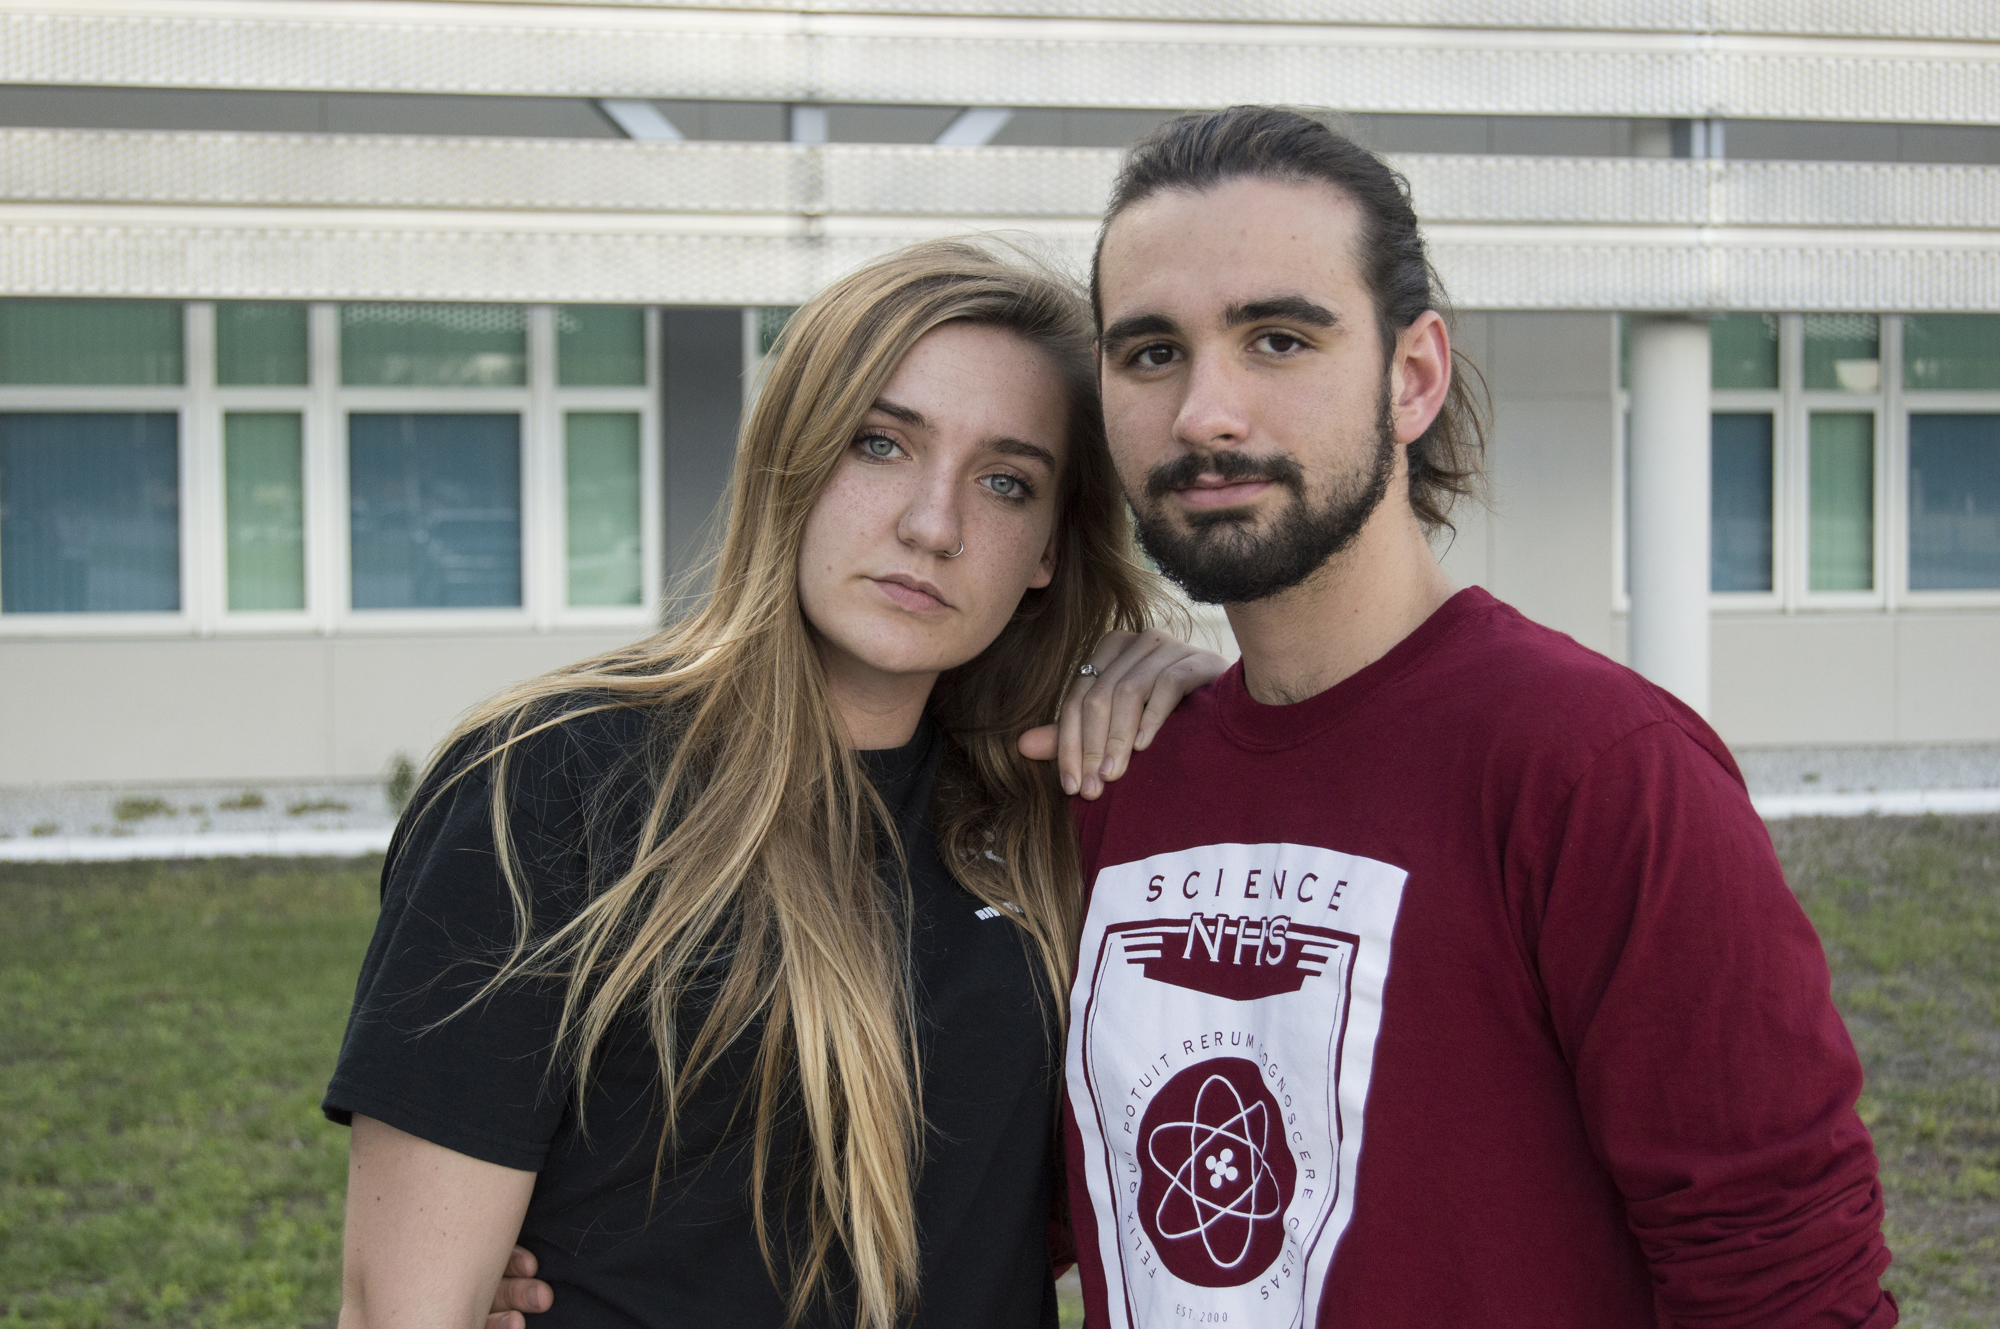 Katy Cartlidge and Anton Kernohan had the idea to organize a walkout and subsequent rally at Riverview High School.